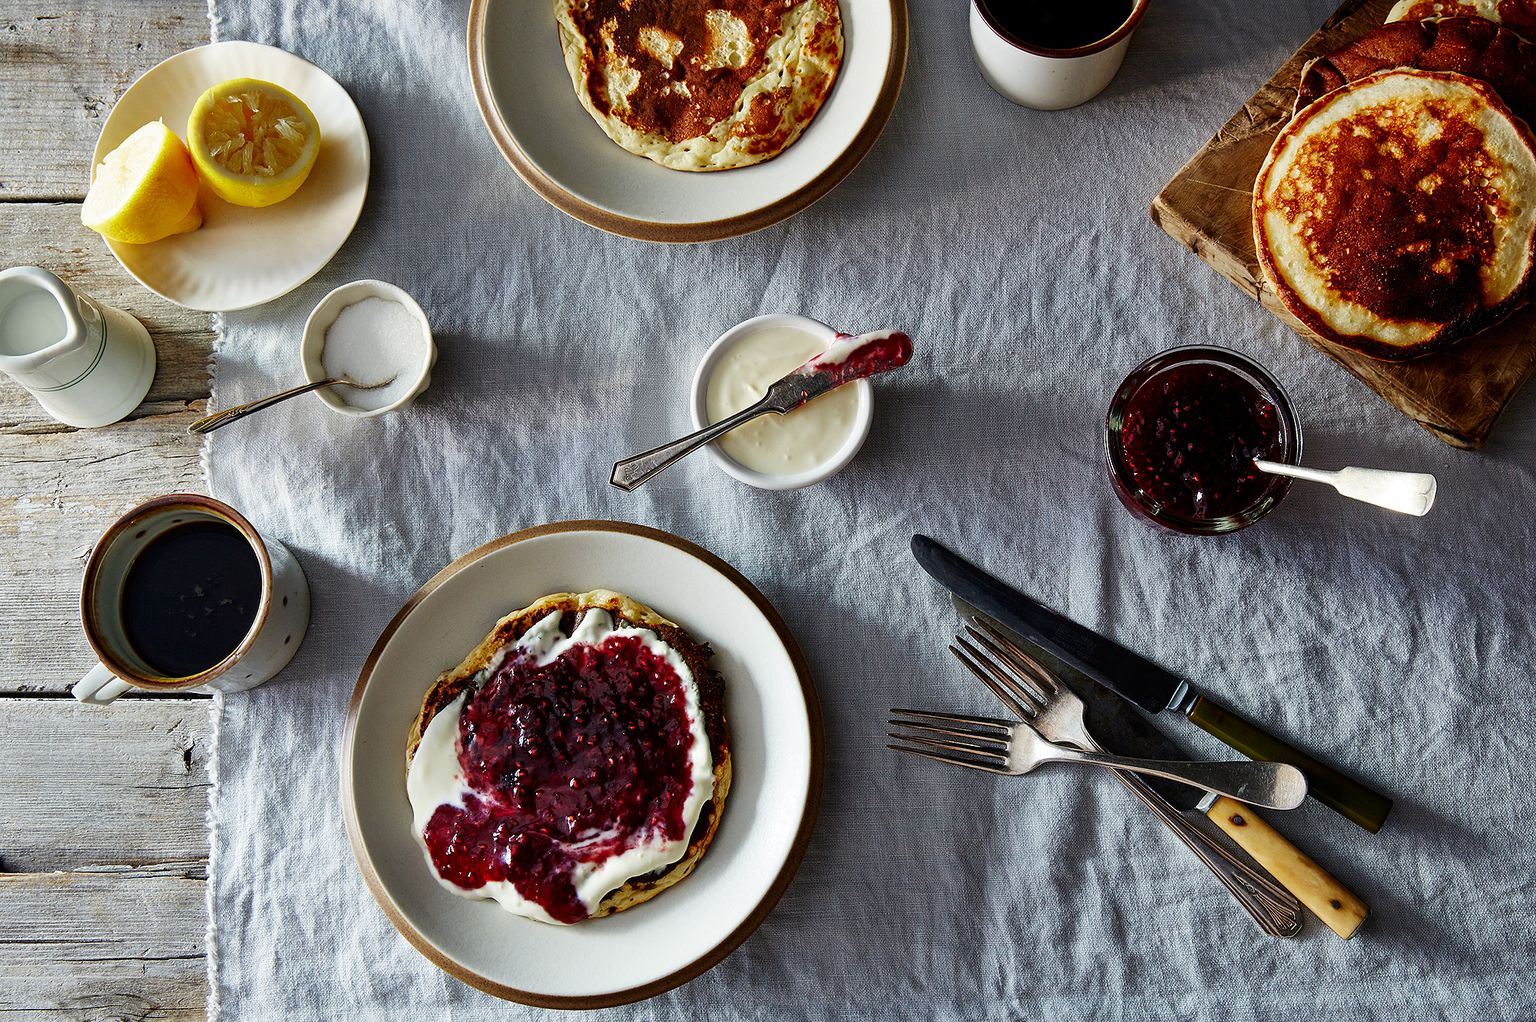 table with pancakes, butter, jam, and cutlery